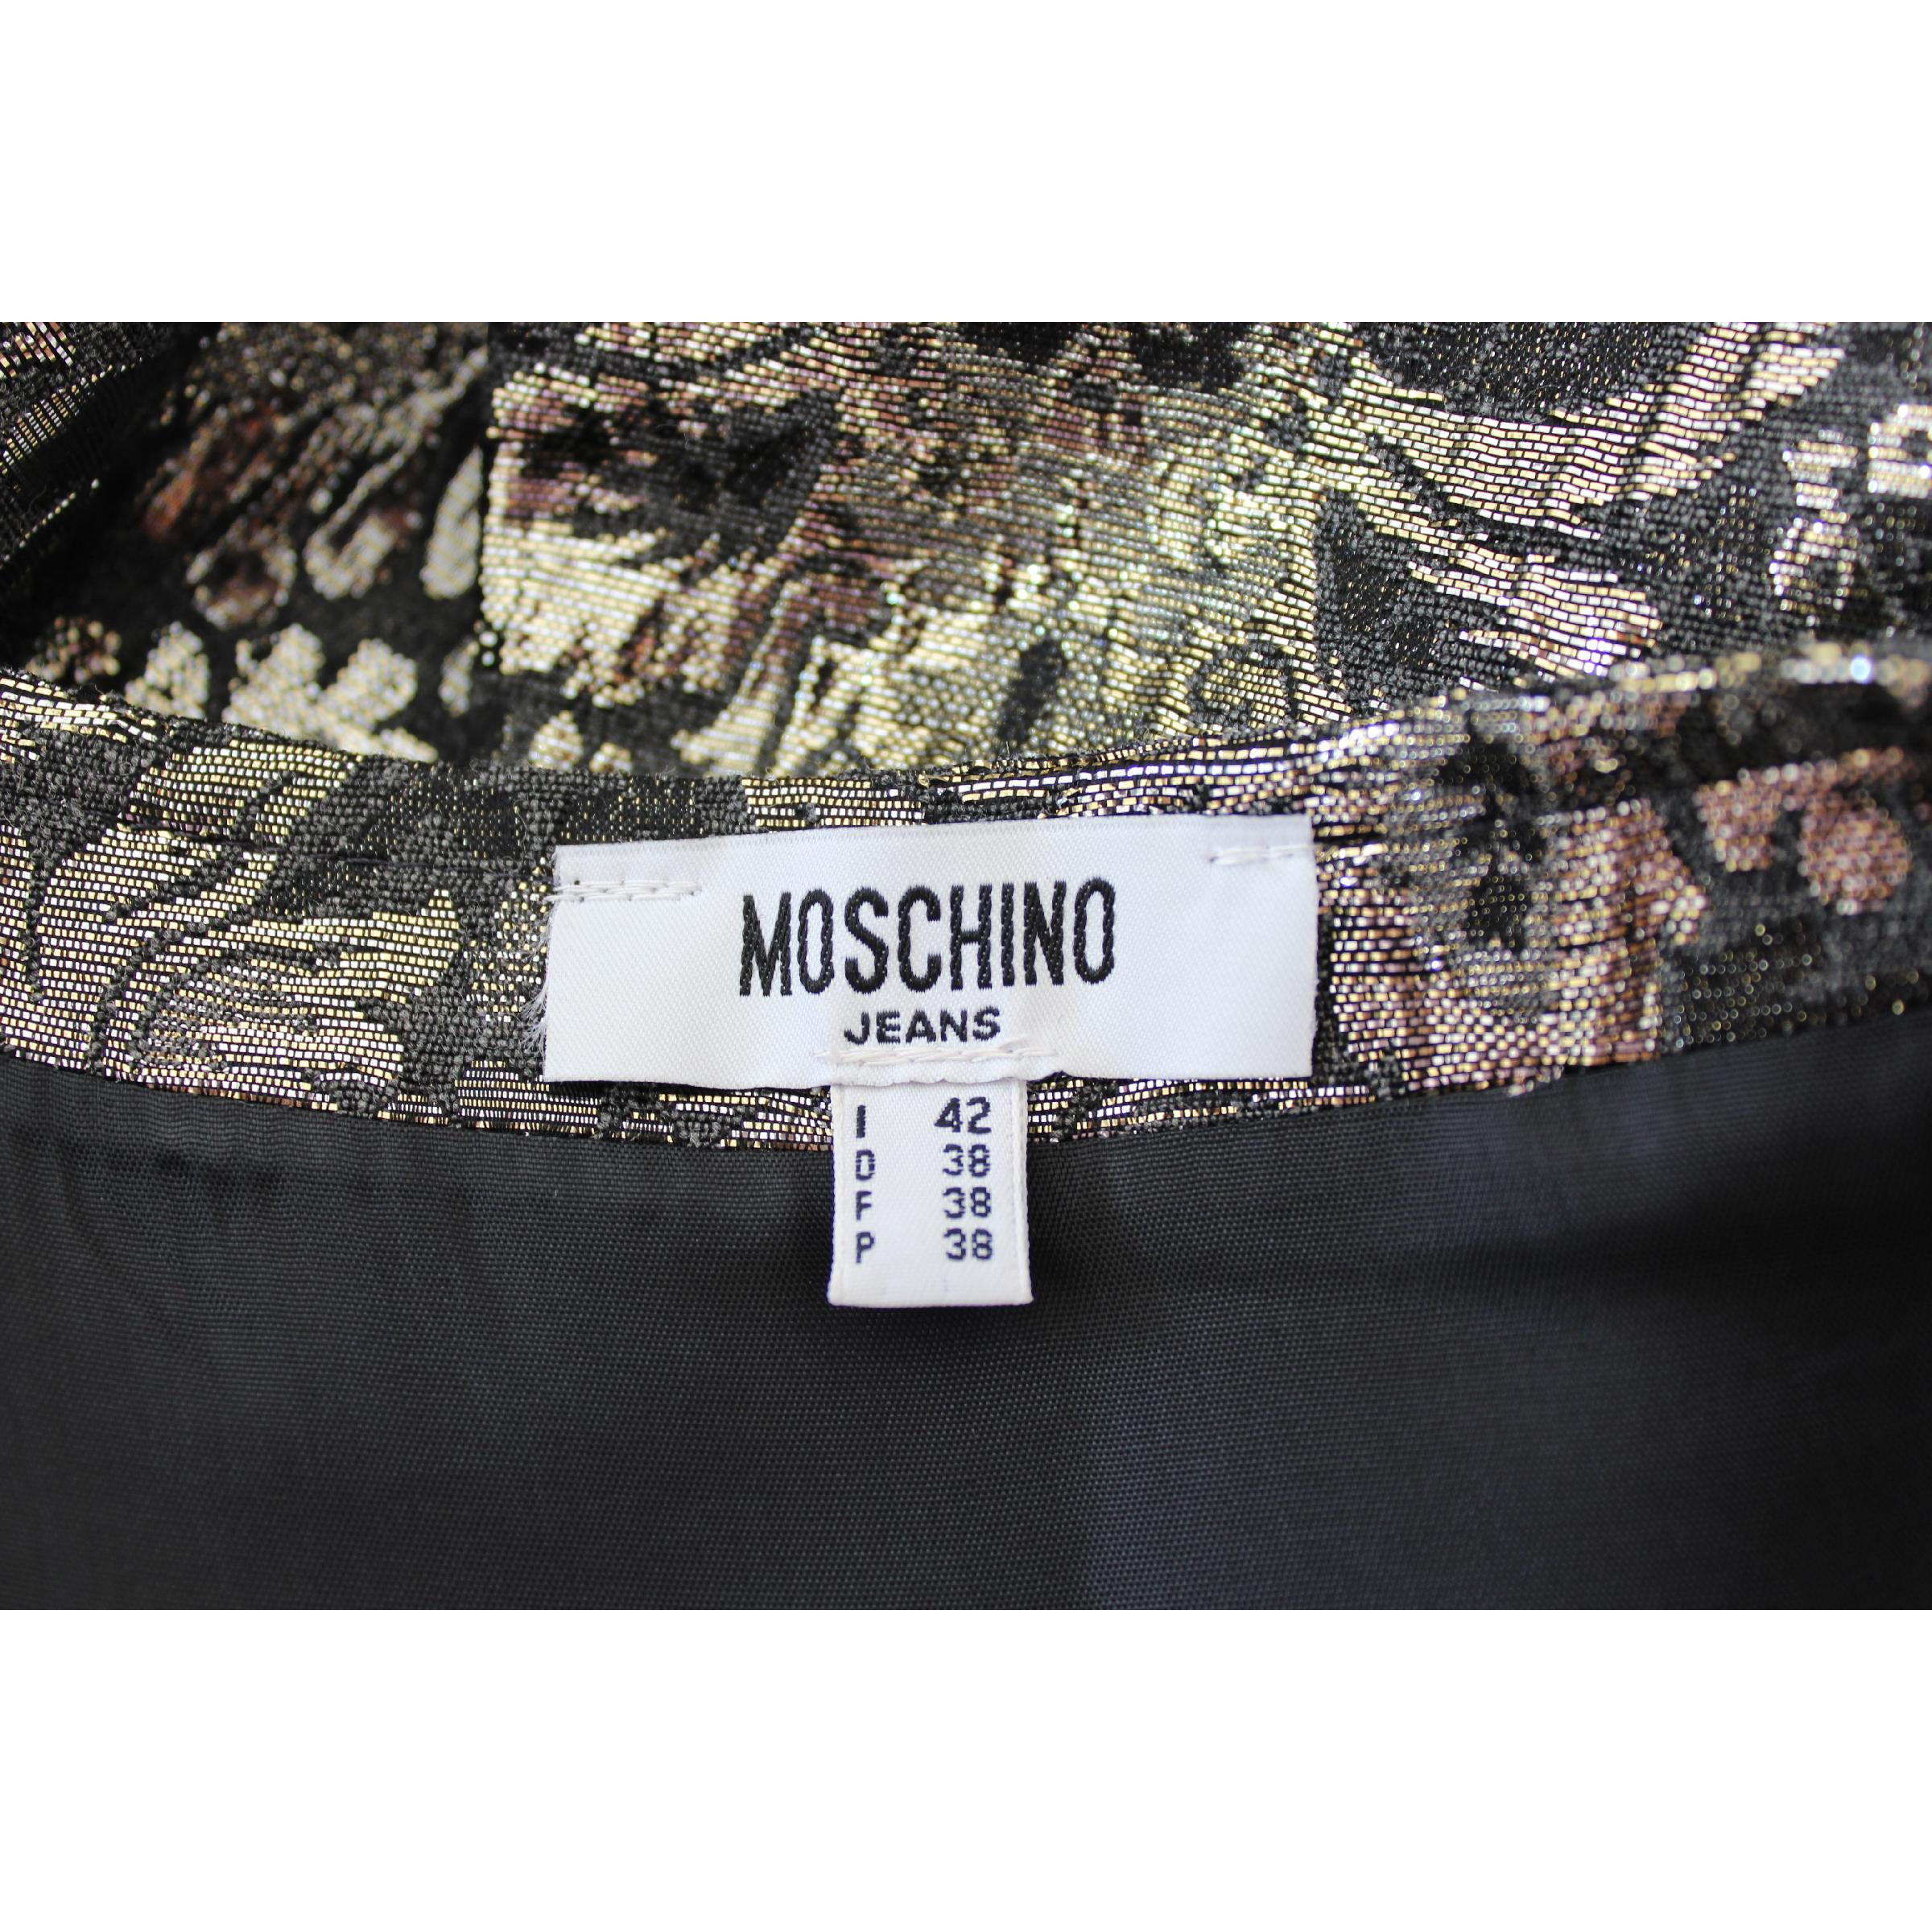 Moschino Black Lame Floral Evening Sheath Dress 1990s For Sale 3